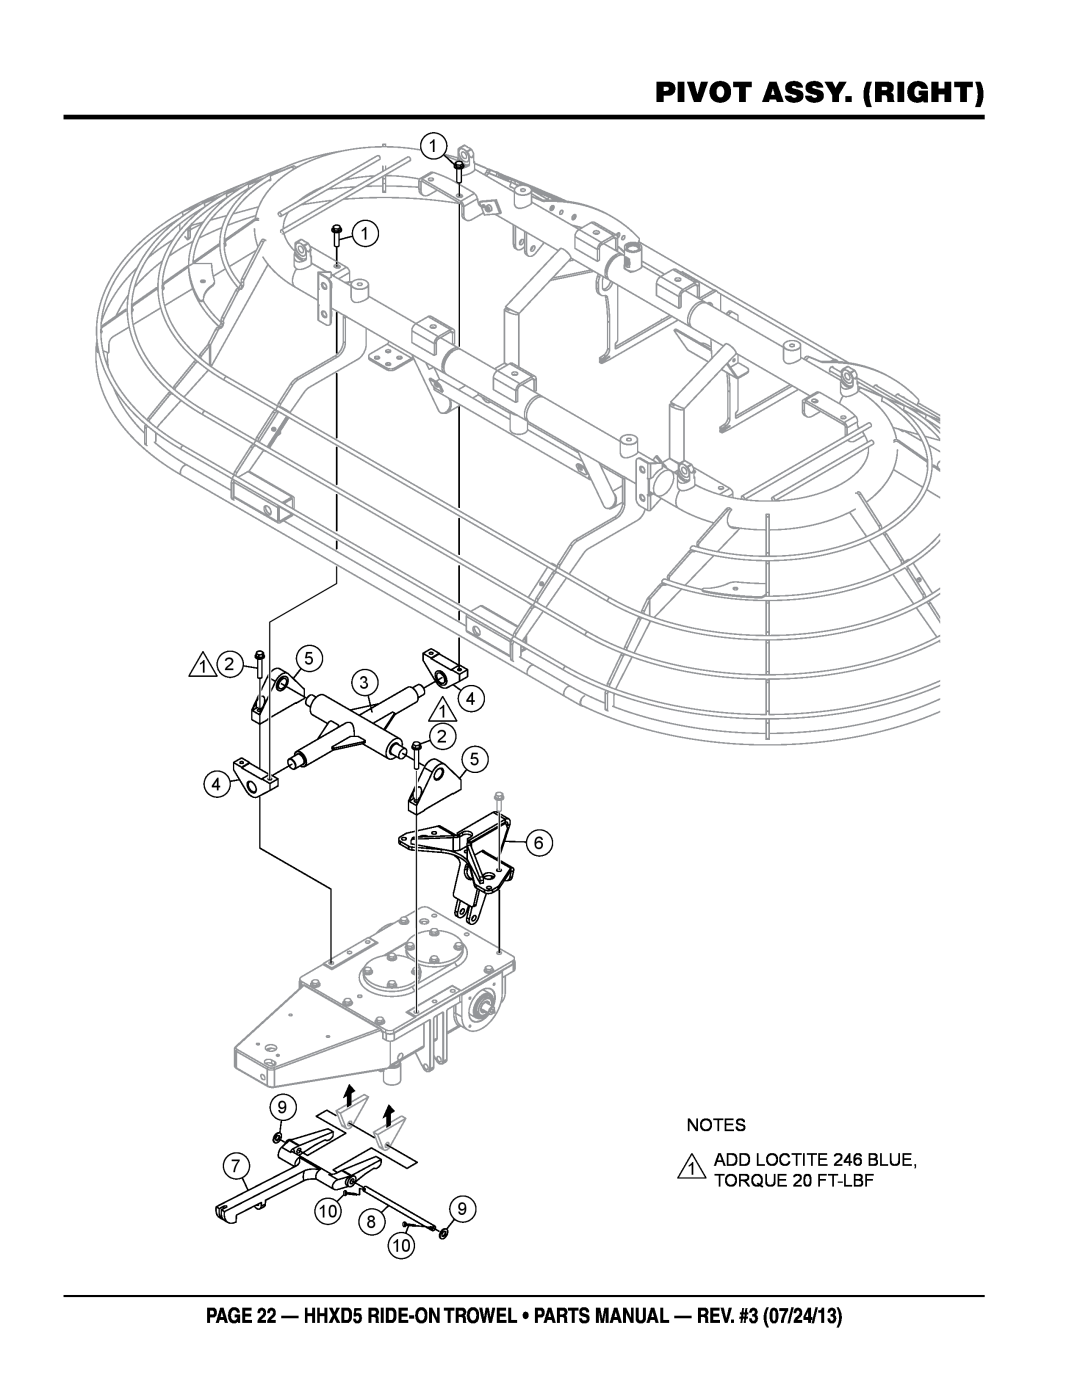 Multiquip HHSD5 pivot ASSY. right, page 22 - HHXD5 RIDE-ON TROWEL parts manual - rev. #3 07/24/13 